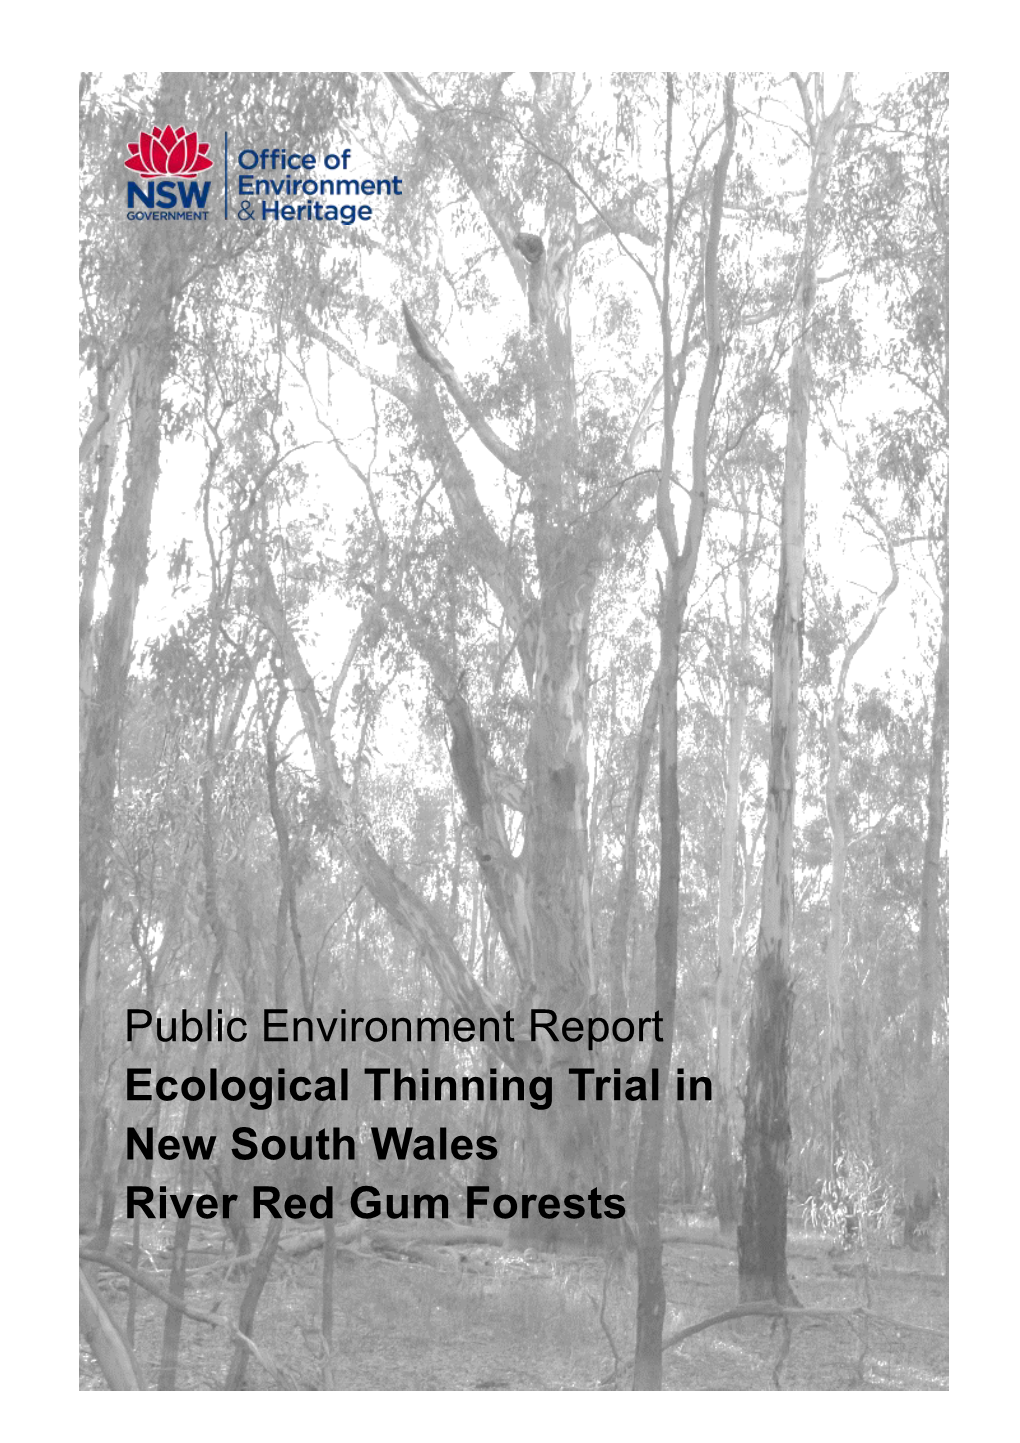 Ecological Thinning Trial in New South Wales River Red Gum Forestsdownload